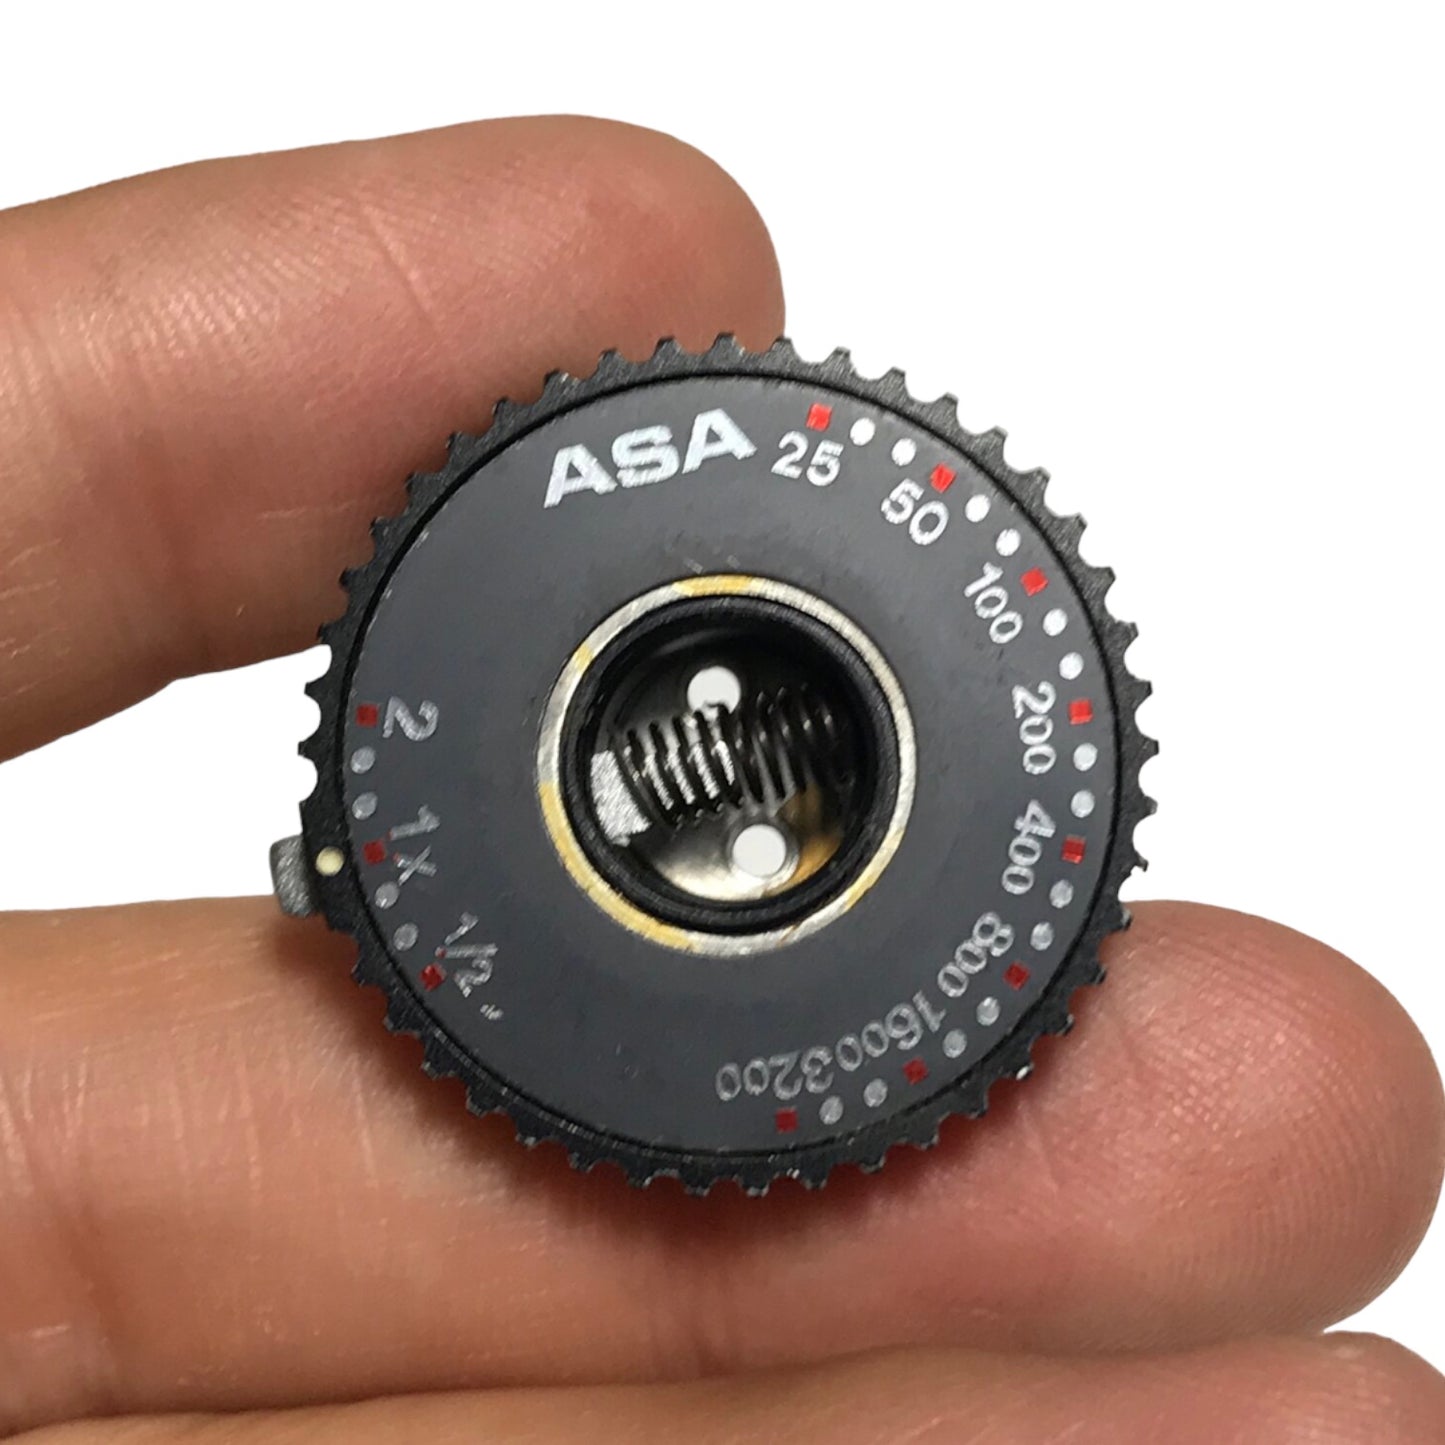 Bronica AEII Meter Finder Assembly Dial (Y)